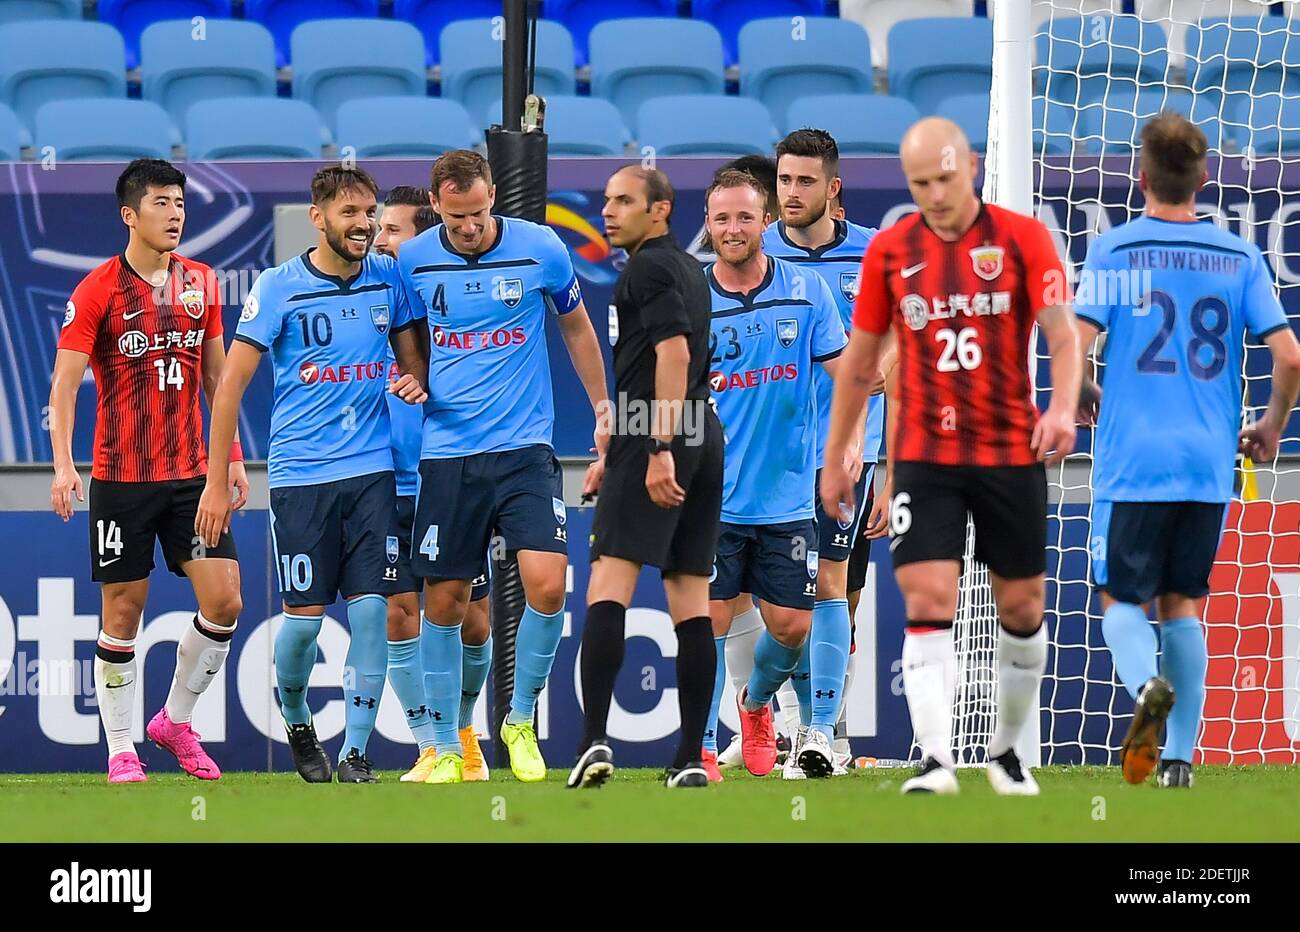 Doha, Qatar. 1st Dec, 2020. Alex Wilkinson (3rd L) of Sydney FC celebrates with teammates after scoring during a Group H football match of the AFC Champions League between Shanghai SIPG FC of China and Sydney FC of Australia in Doha, Qatar, Dec. 1, 2020. Credit: Nikku/Xinhua/Alamy Live News Stock Photo